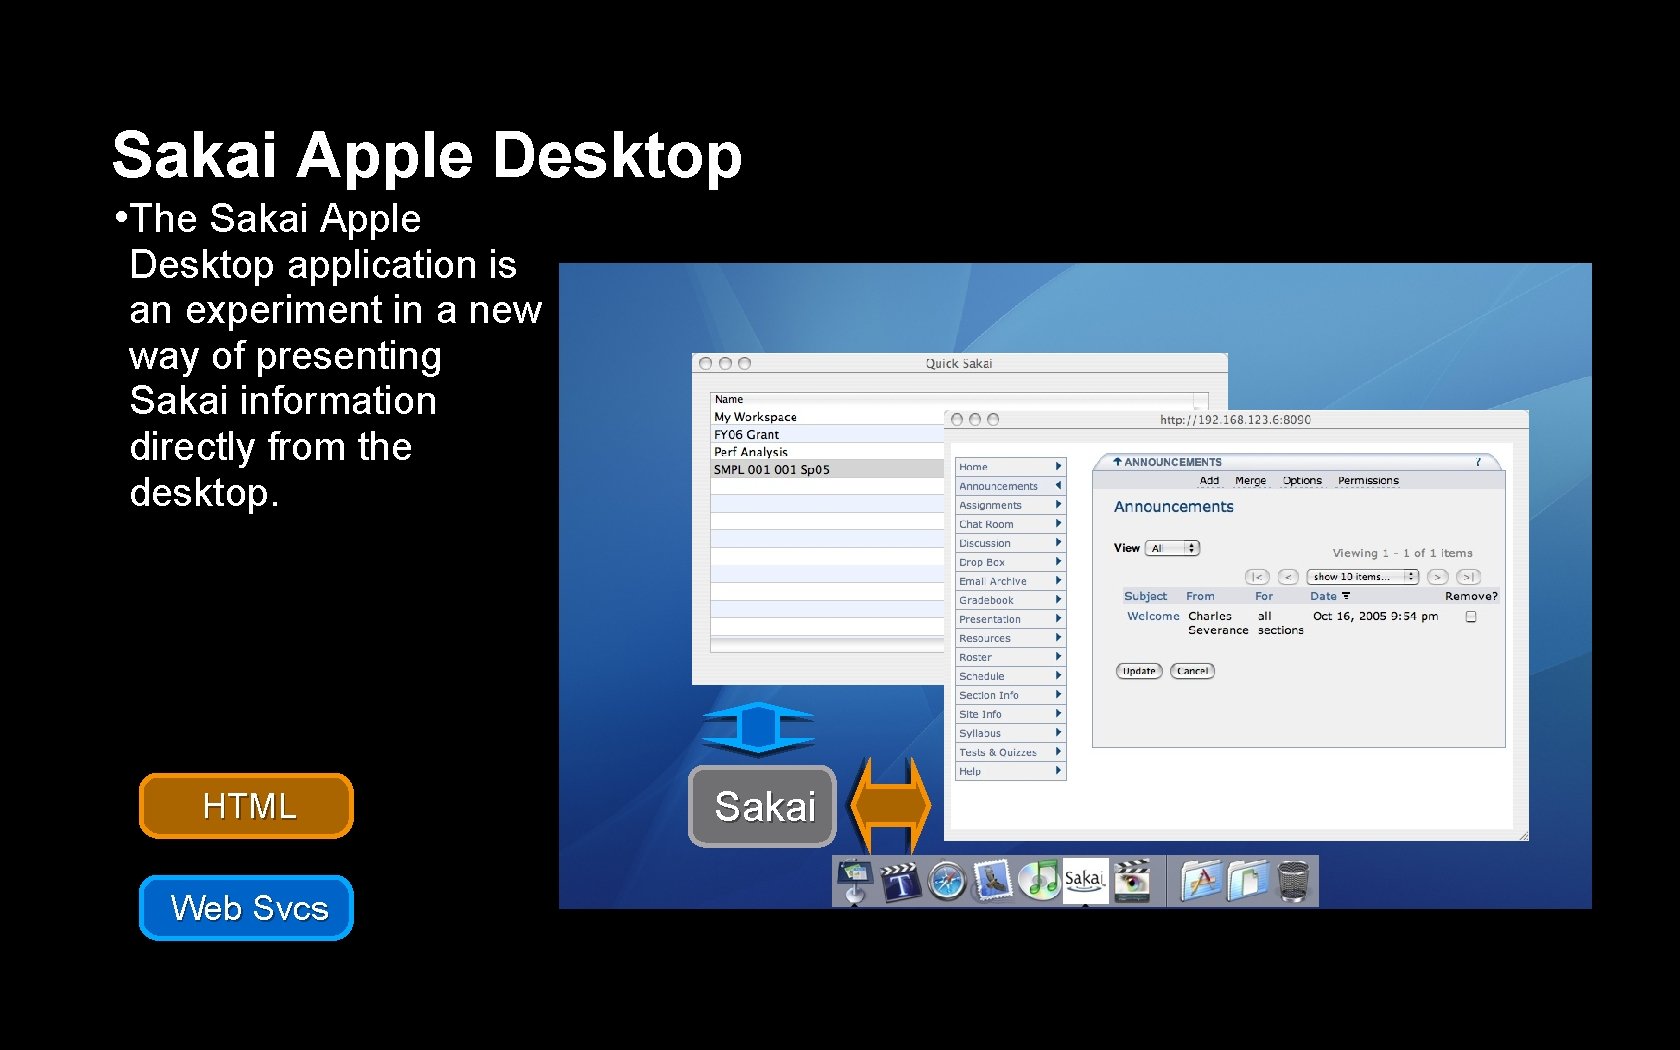 Sakai Apple Desktop • The Sakai Apple Desktop application is an experiment in a